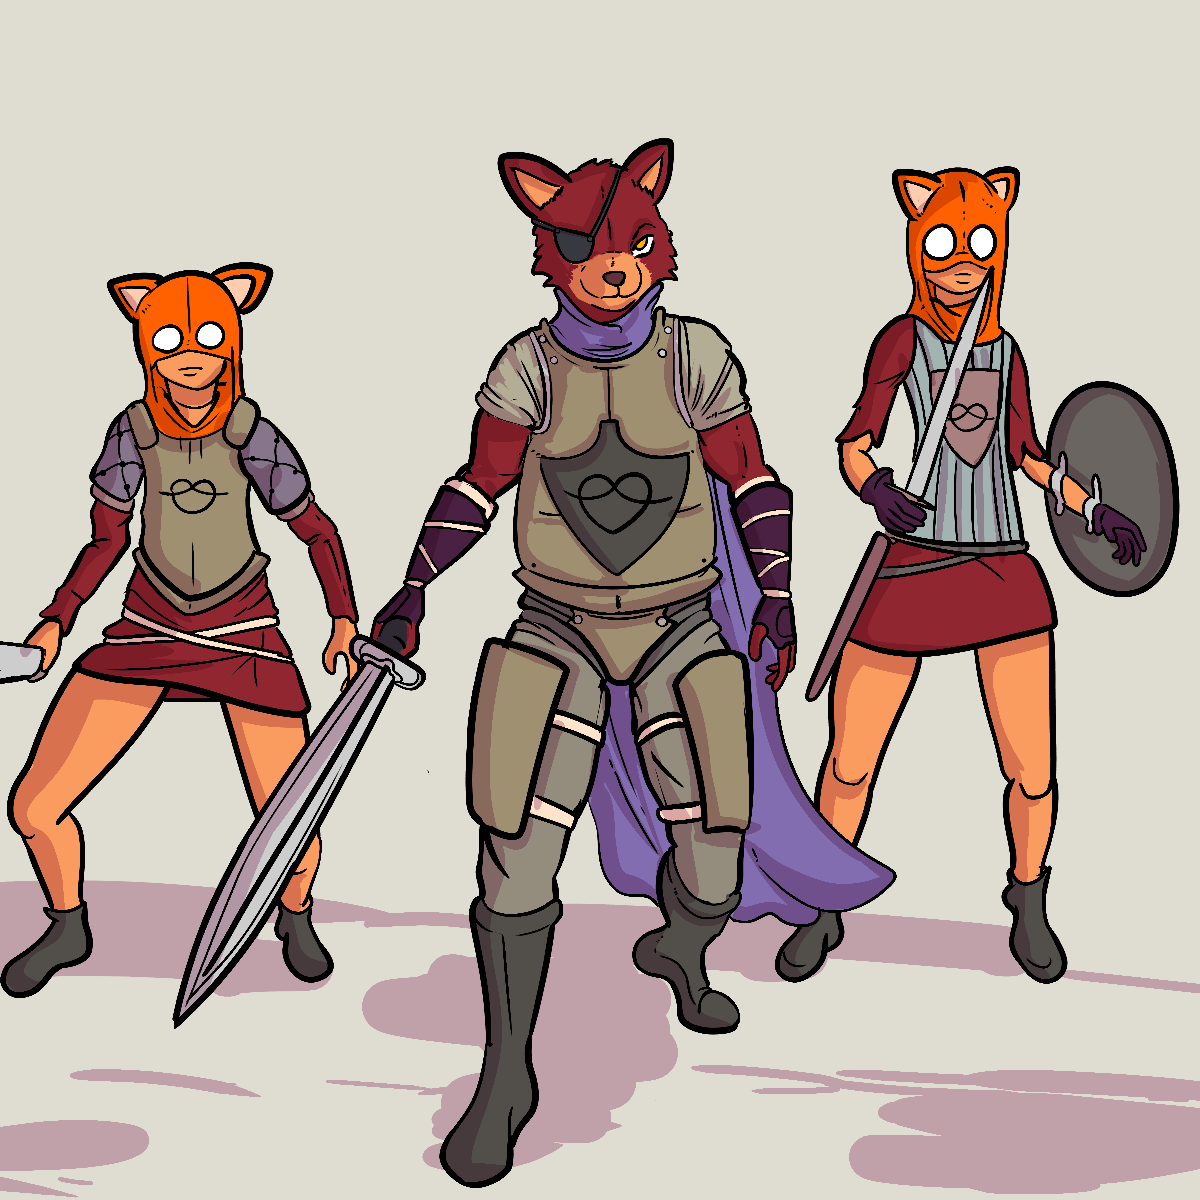 Crifox, leader of the Fox Boys and two of his boys, a group skirting the line between